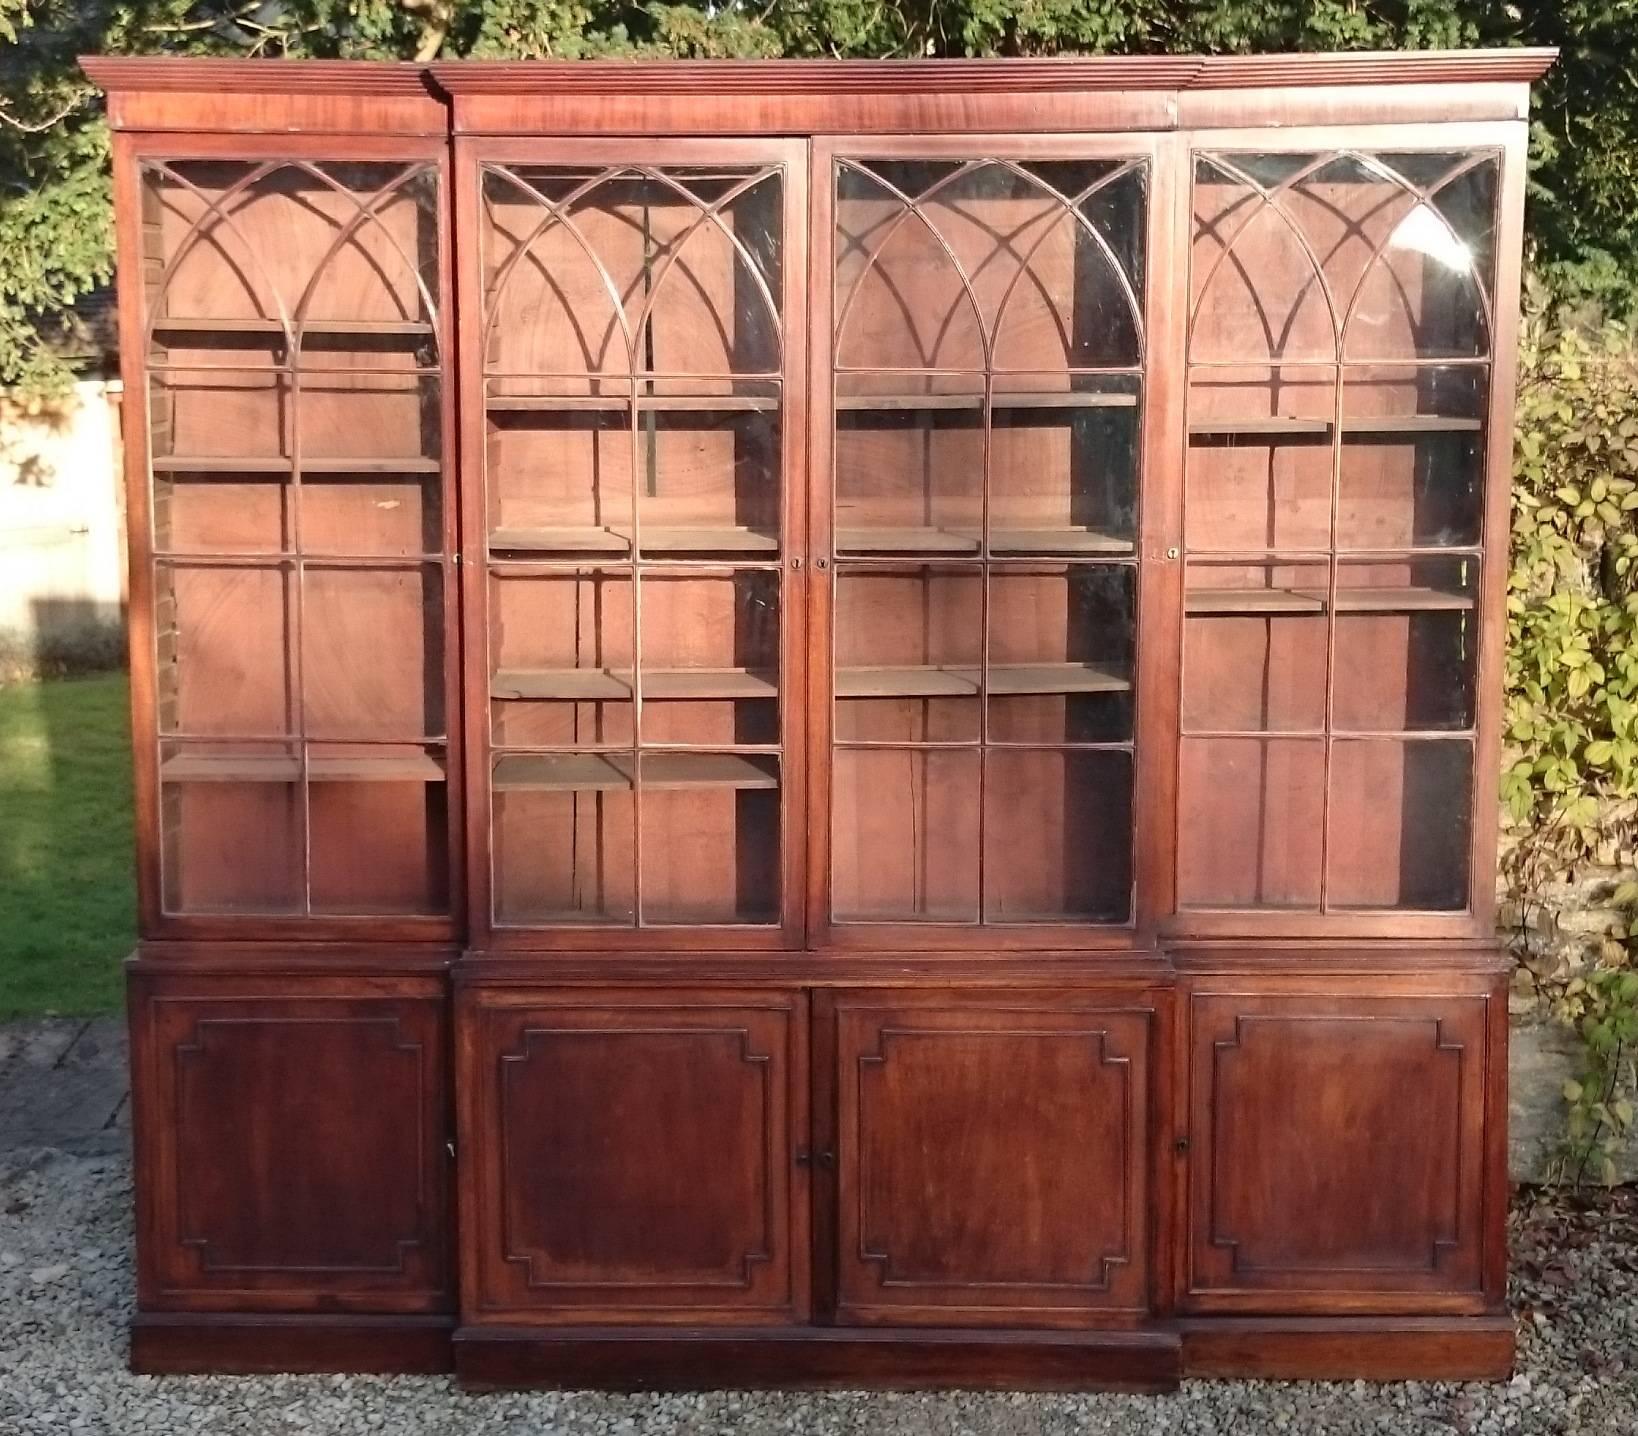 Large antique bookcase made of good South American mahogany. It has eight doors, four glass for display and four blind to hide things, behind which are adjustable shelves. The doors and astral glazing bars are typical of this early period of cabinet